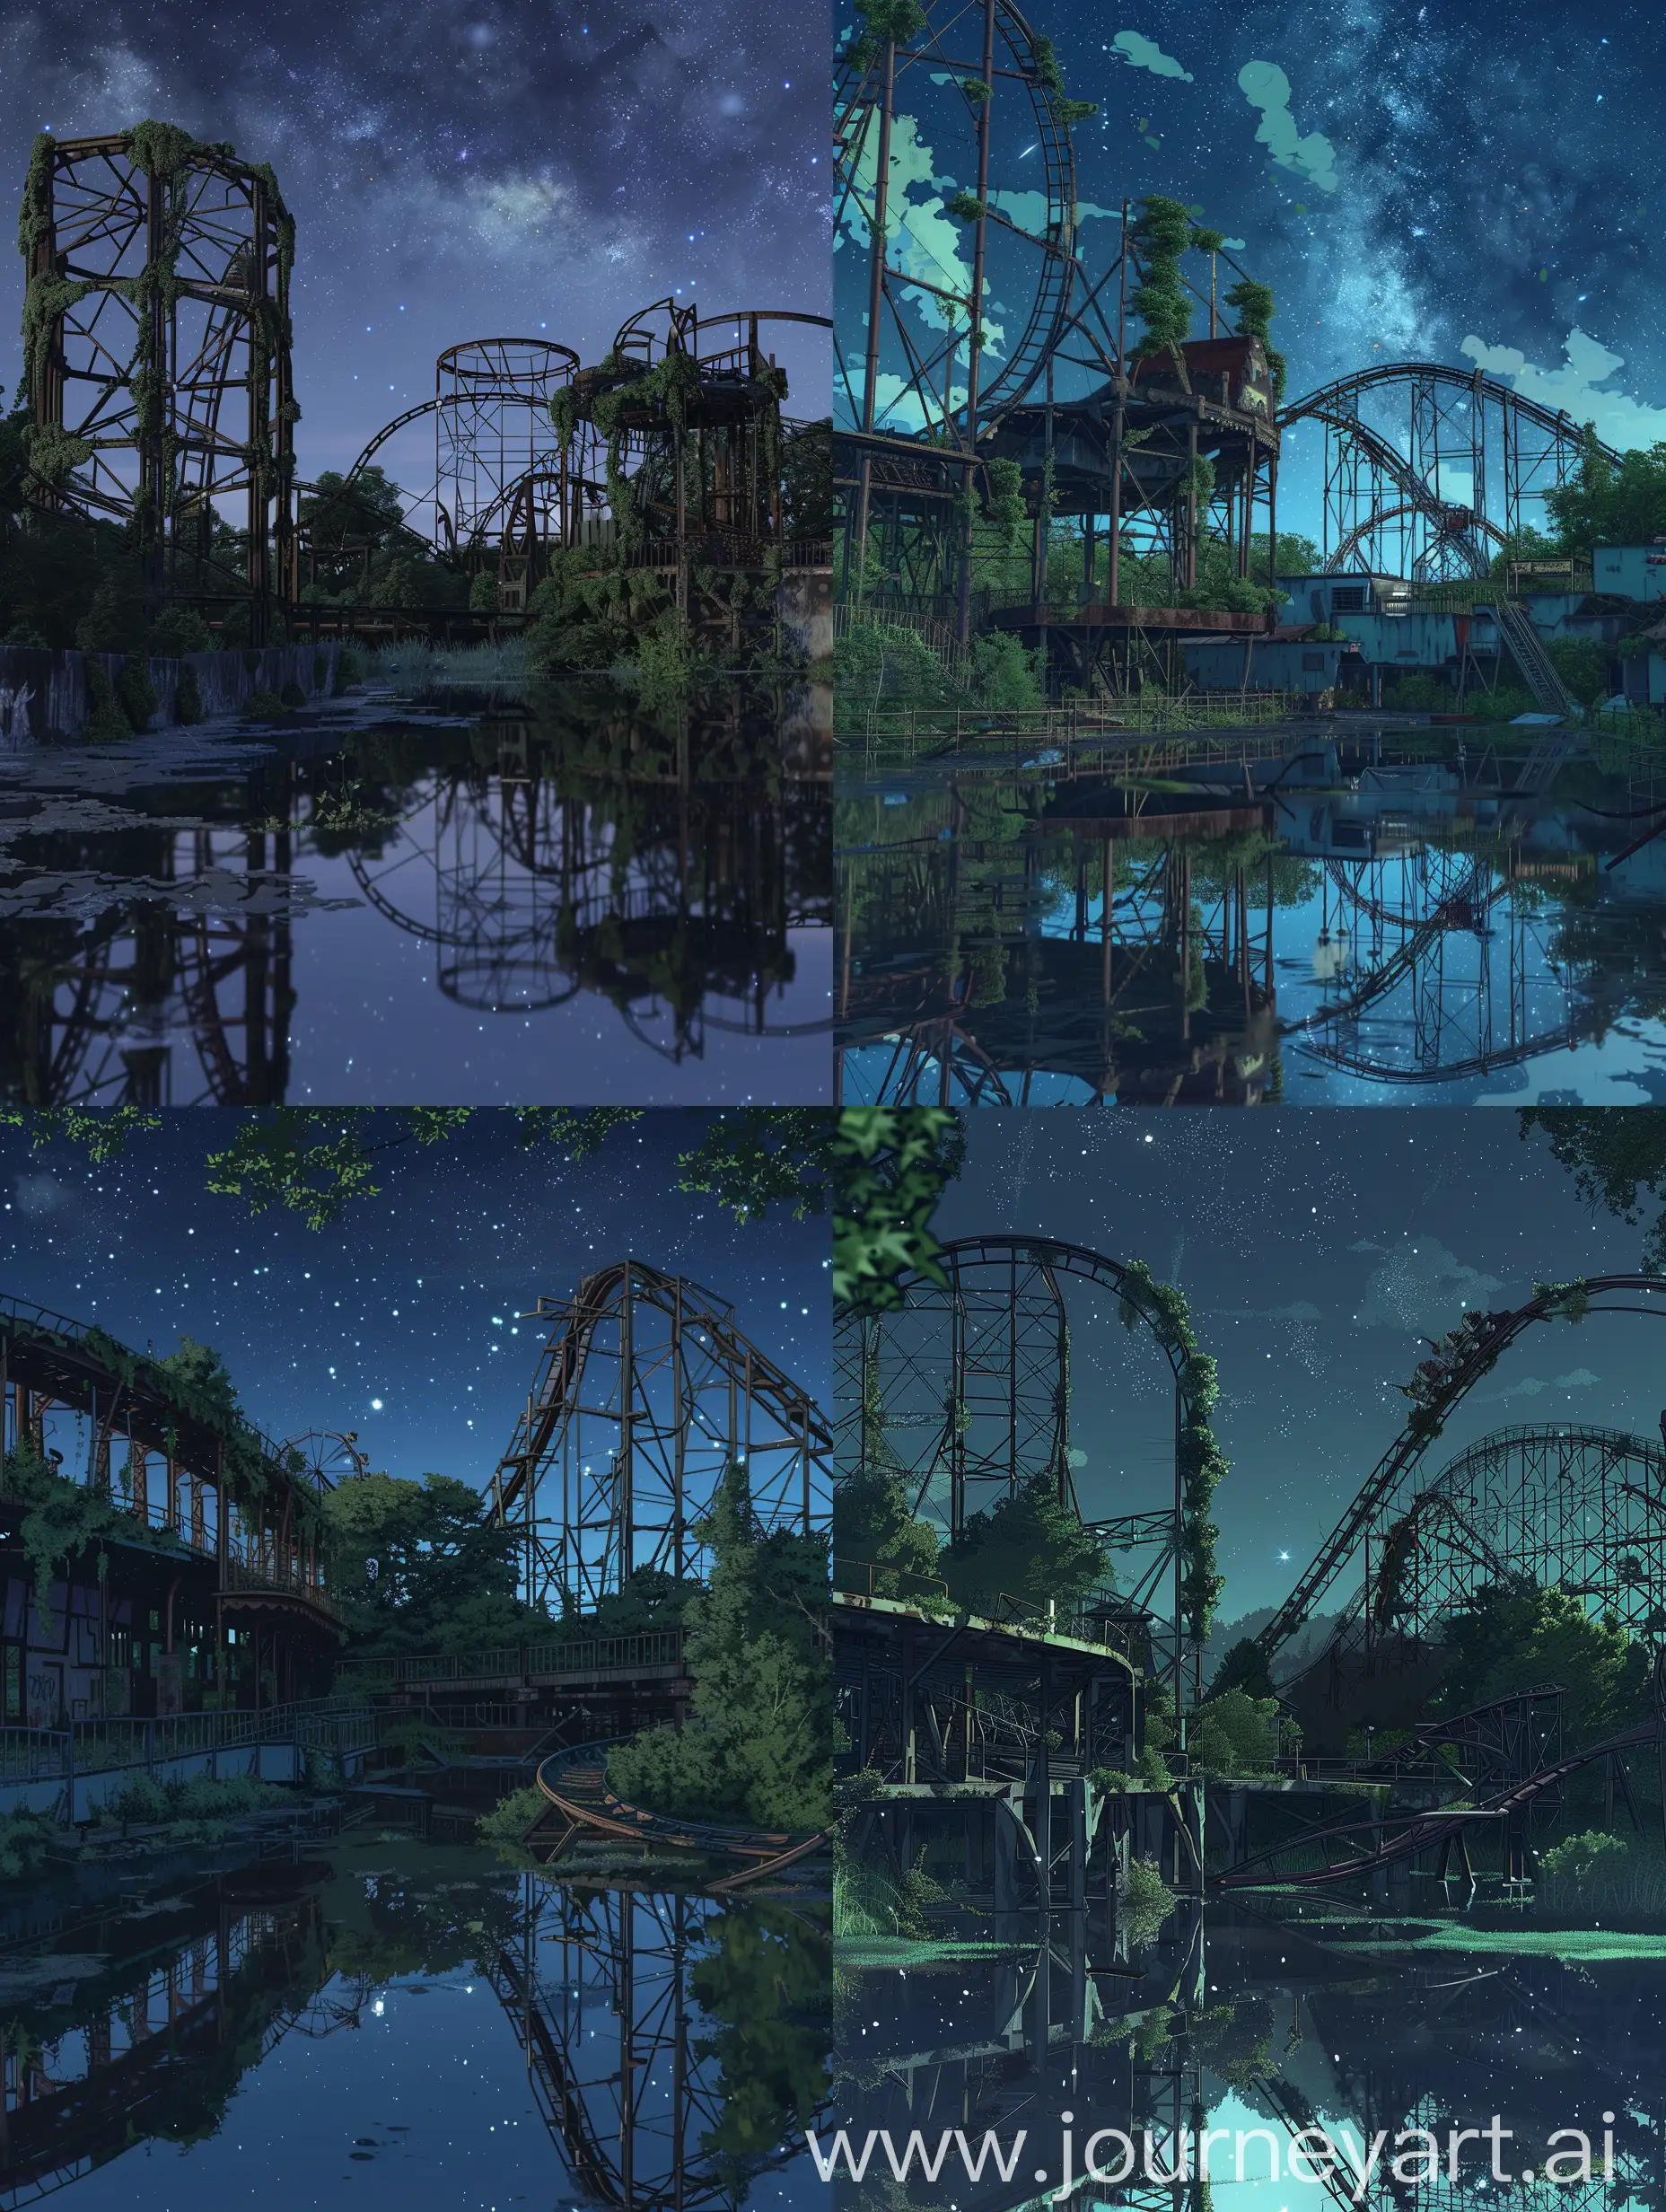 Beautiful anime style,mokoto shikai style,sharp detailing,abandoned amusement park at night. The skeletal remains of roller coasters and other rides stand stark against the backdrop of a star-filled sky, bathed in the soft luminescence of the moon. Nature has begun to reclaim this once vibrant place of joy, with overgrown greenery intertwining with the rusting metal. The stillness of the water mirrors the eerie structures, adding a reflective symmetry to the scene. It’s a poignant reminder of the transience of human endeavors against the relentless march of time and nature.